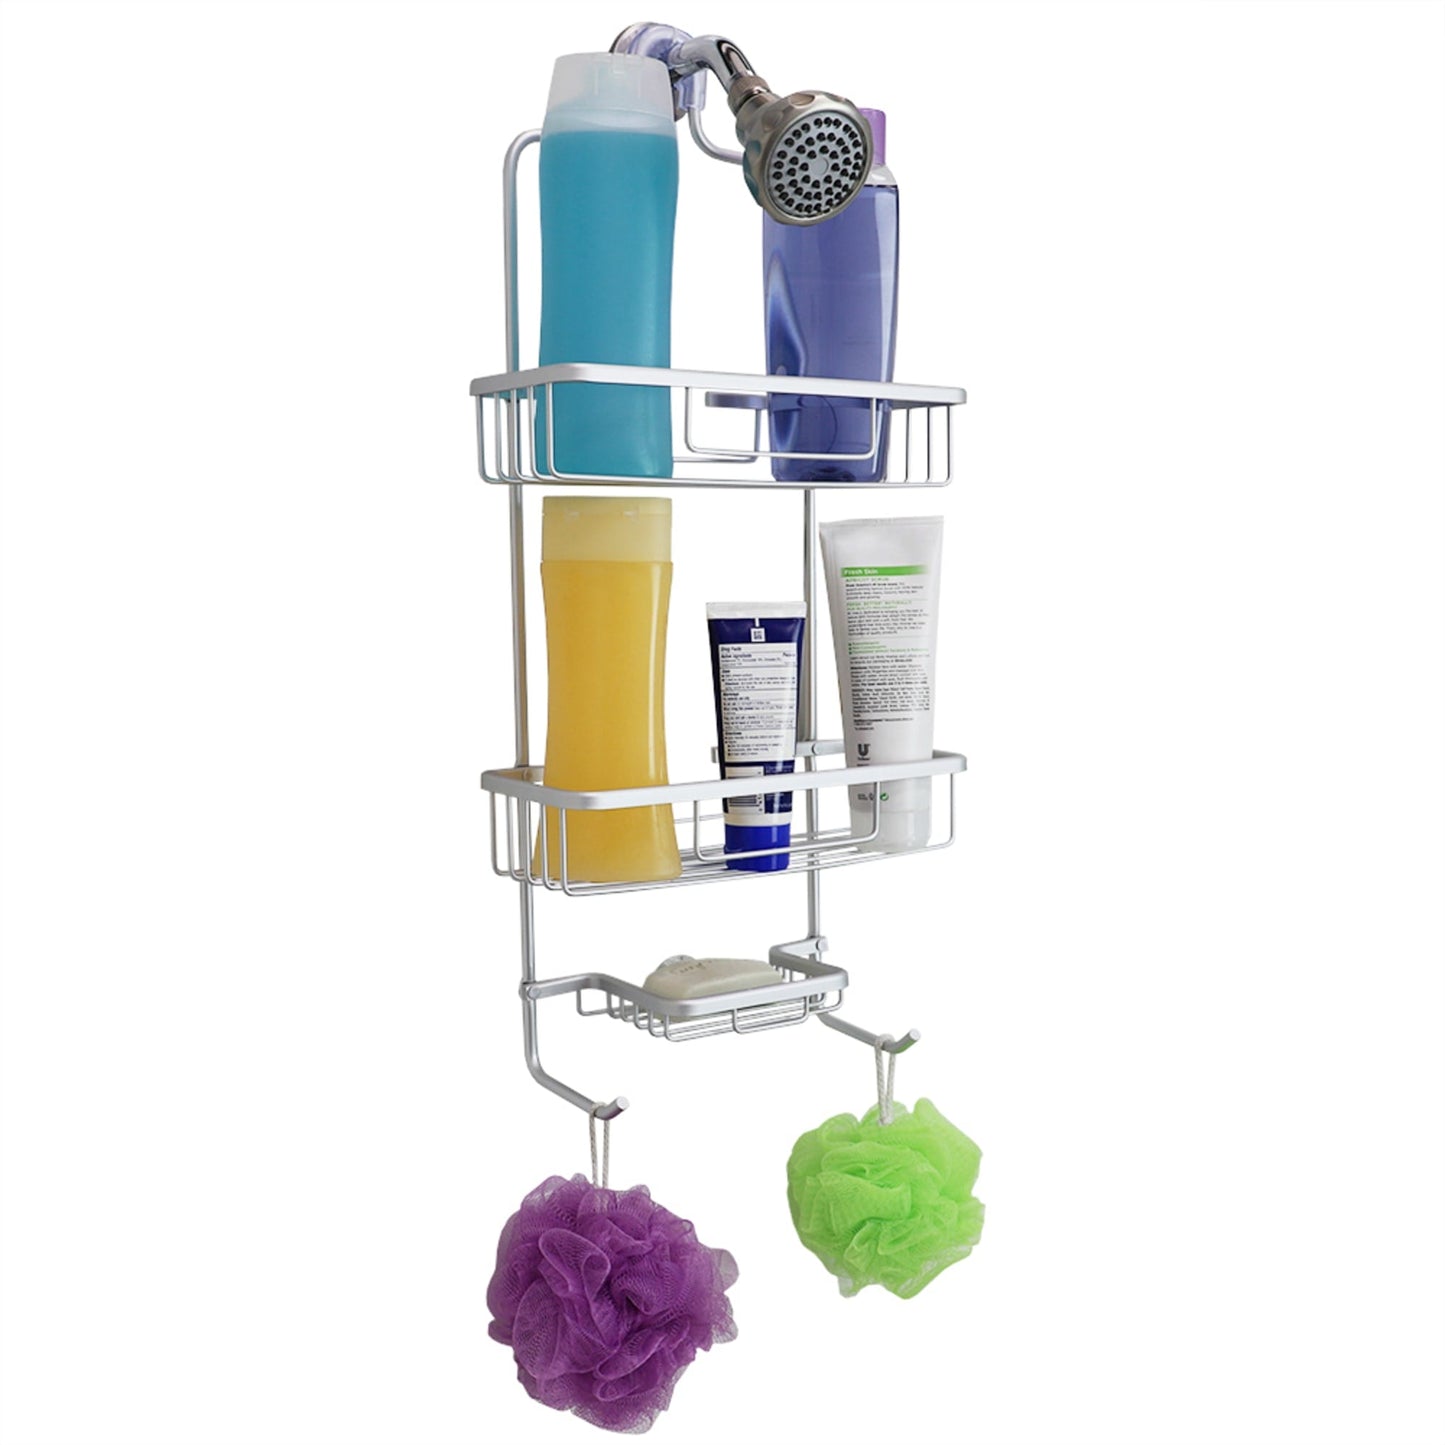 2 Tier Aluminum Suction Shower Caddy with Extra Long Baskets with Integrated hooks and Soap Tray, Grey